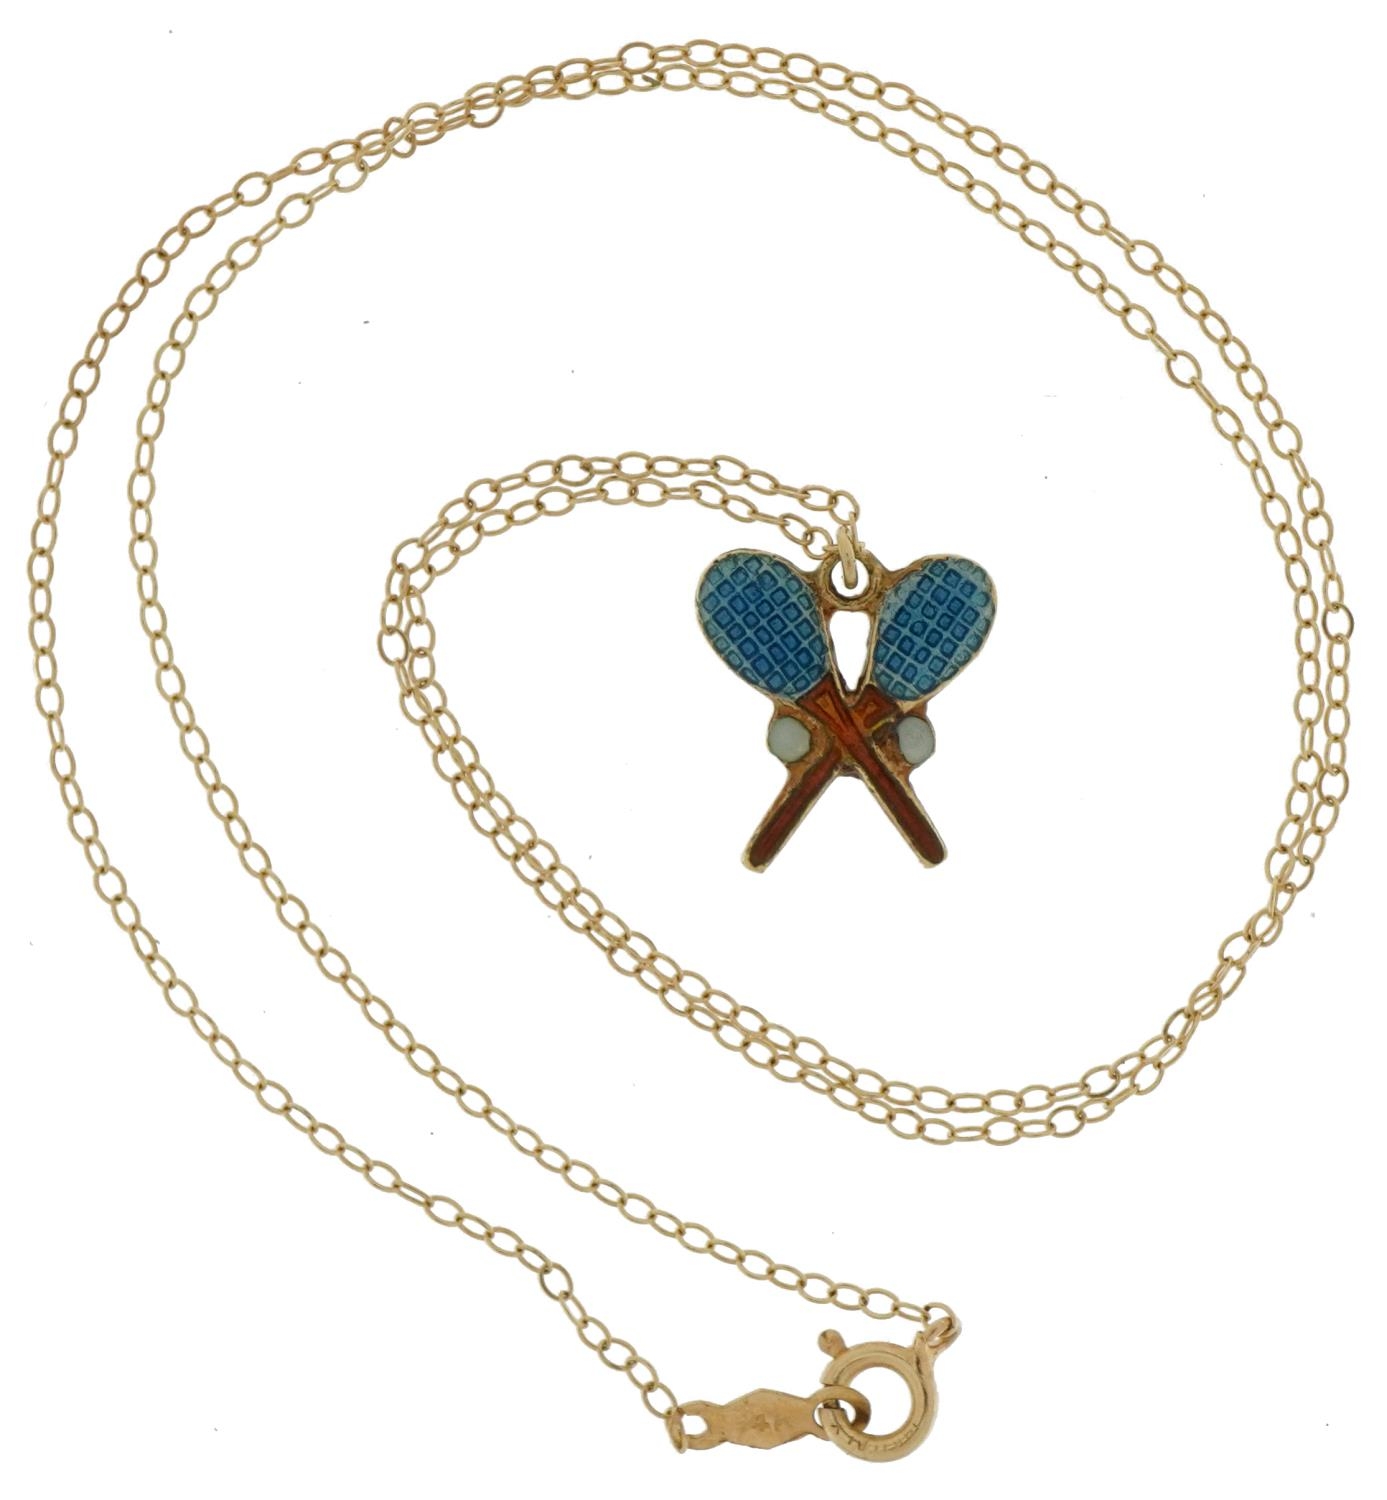 14ct gold and enamel tennis racquet pendant on 14ct gold necklace, 1.2cm high and 38cm in length, - Image 2 of 5